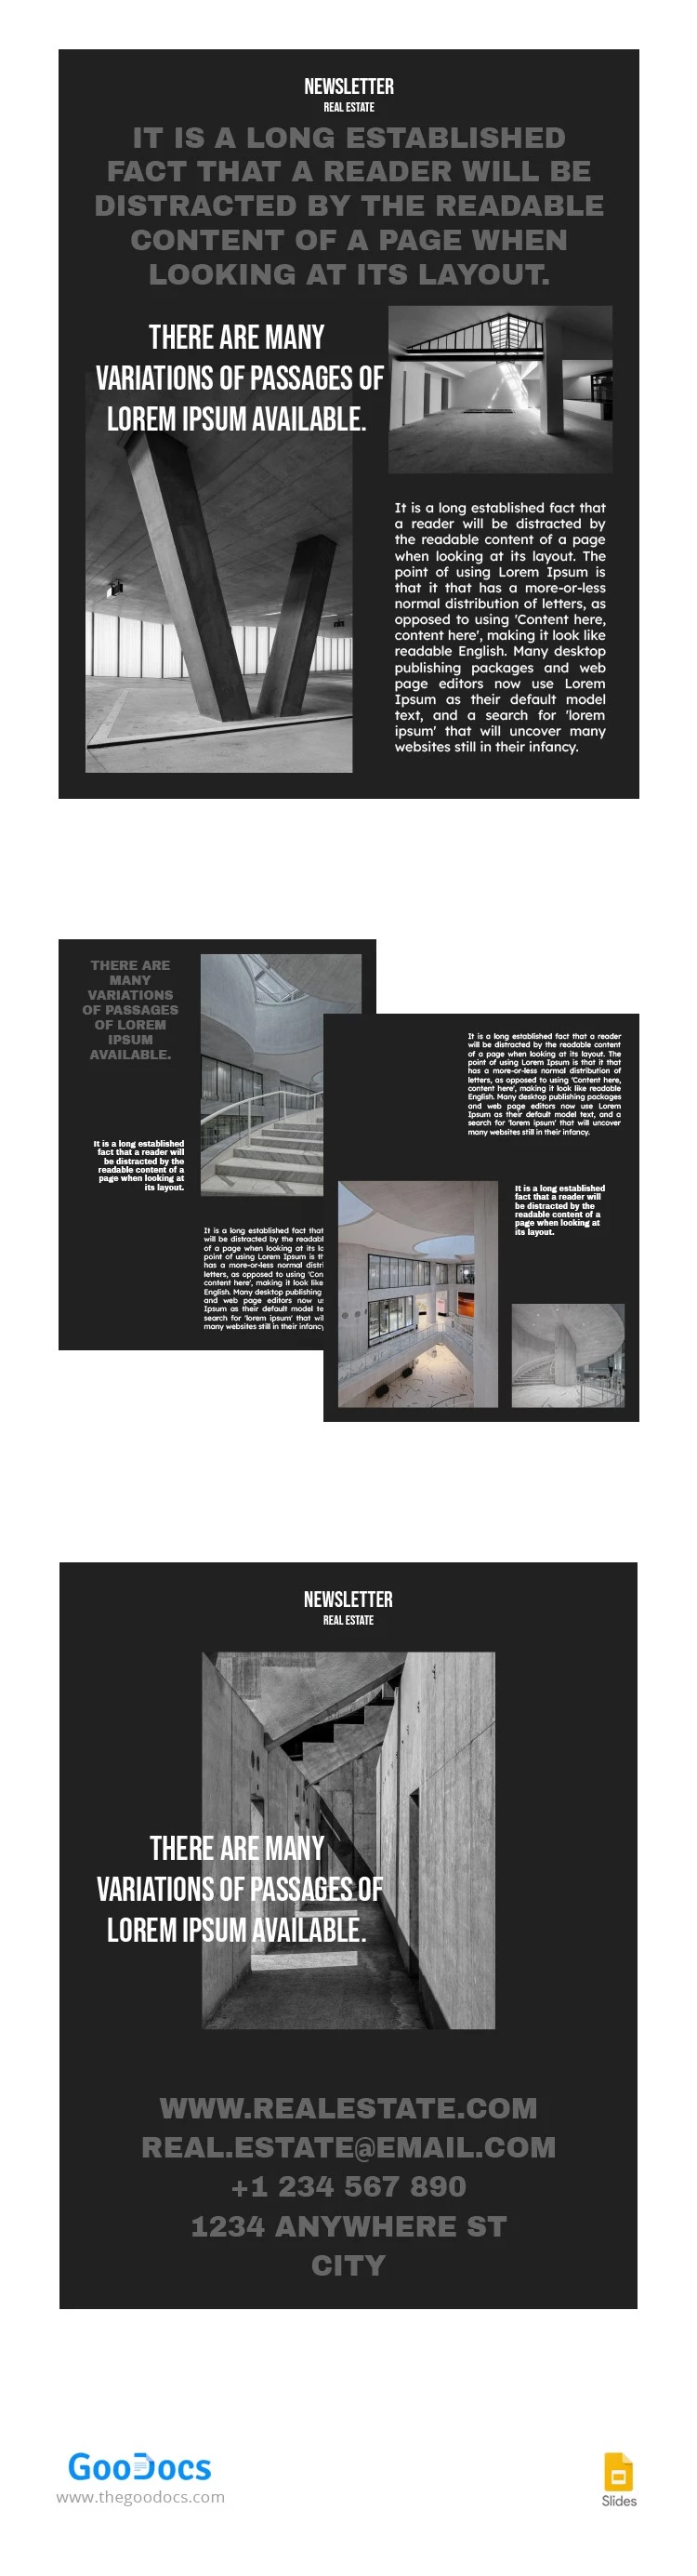 Bulletin immobilier sombre. - free Google Docs Template - 10064275